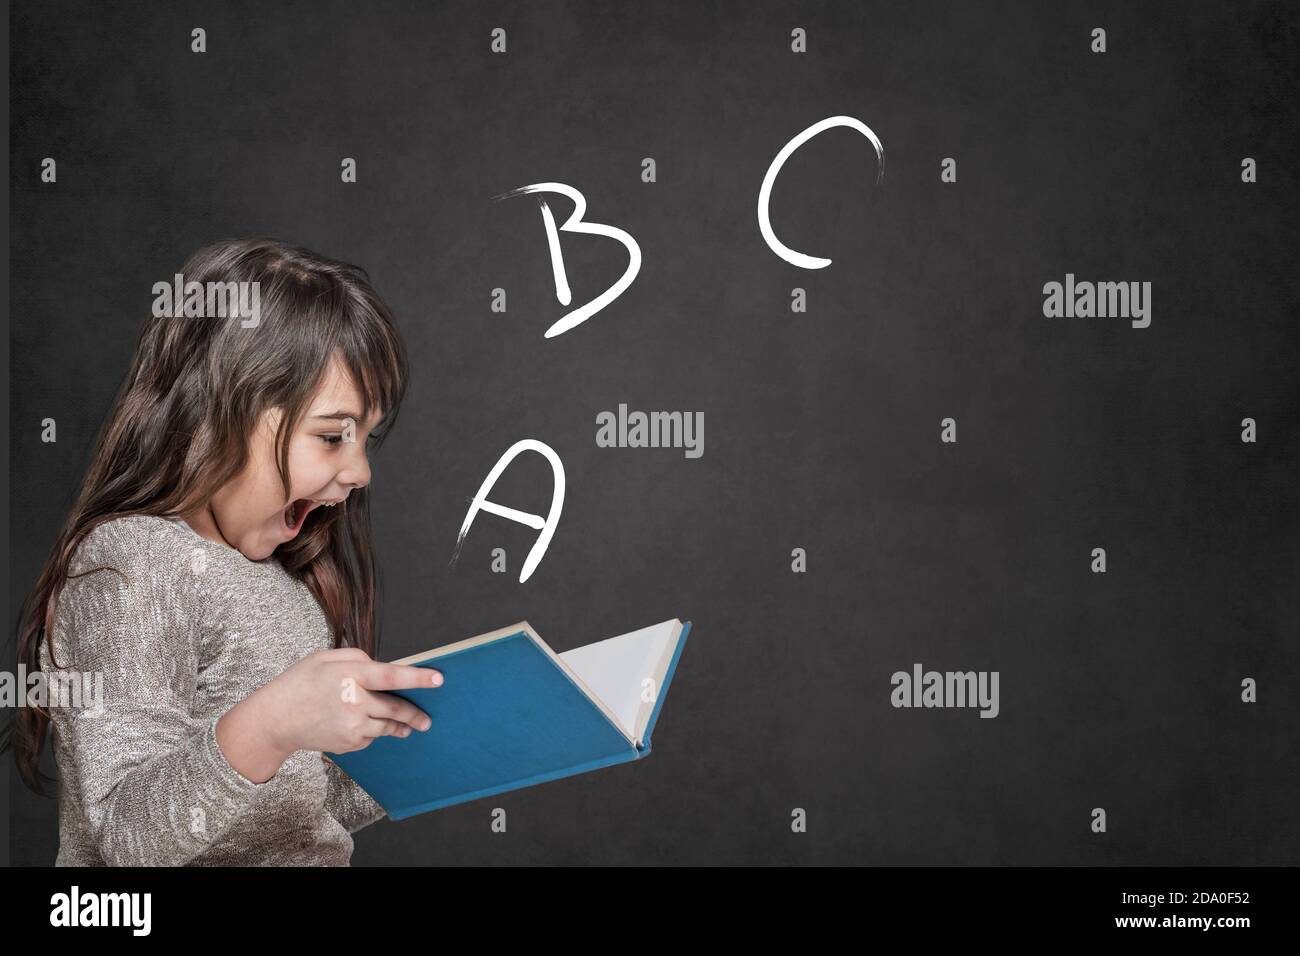 Cute tanned long haired  little girl is surprised at the letters ABC coming out of an open book she is holding in her hands. Stock Photo